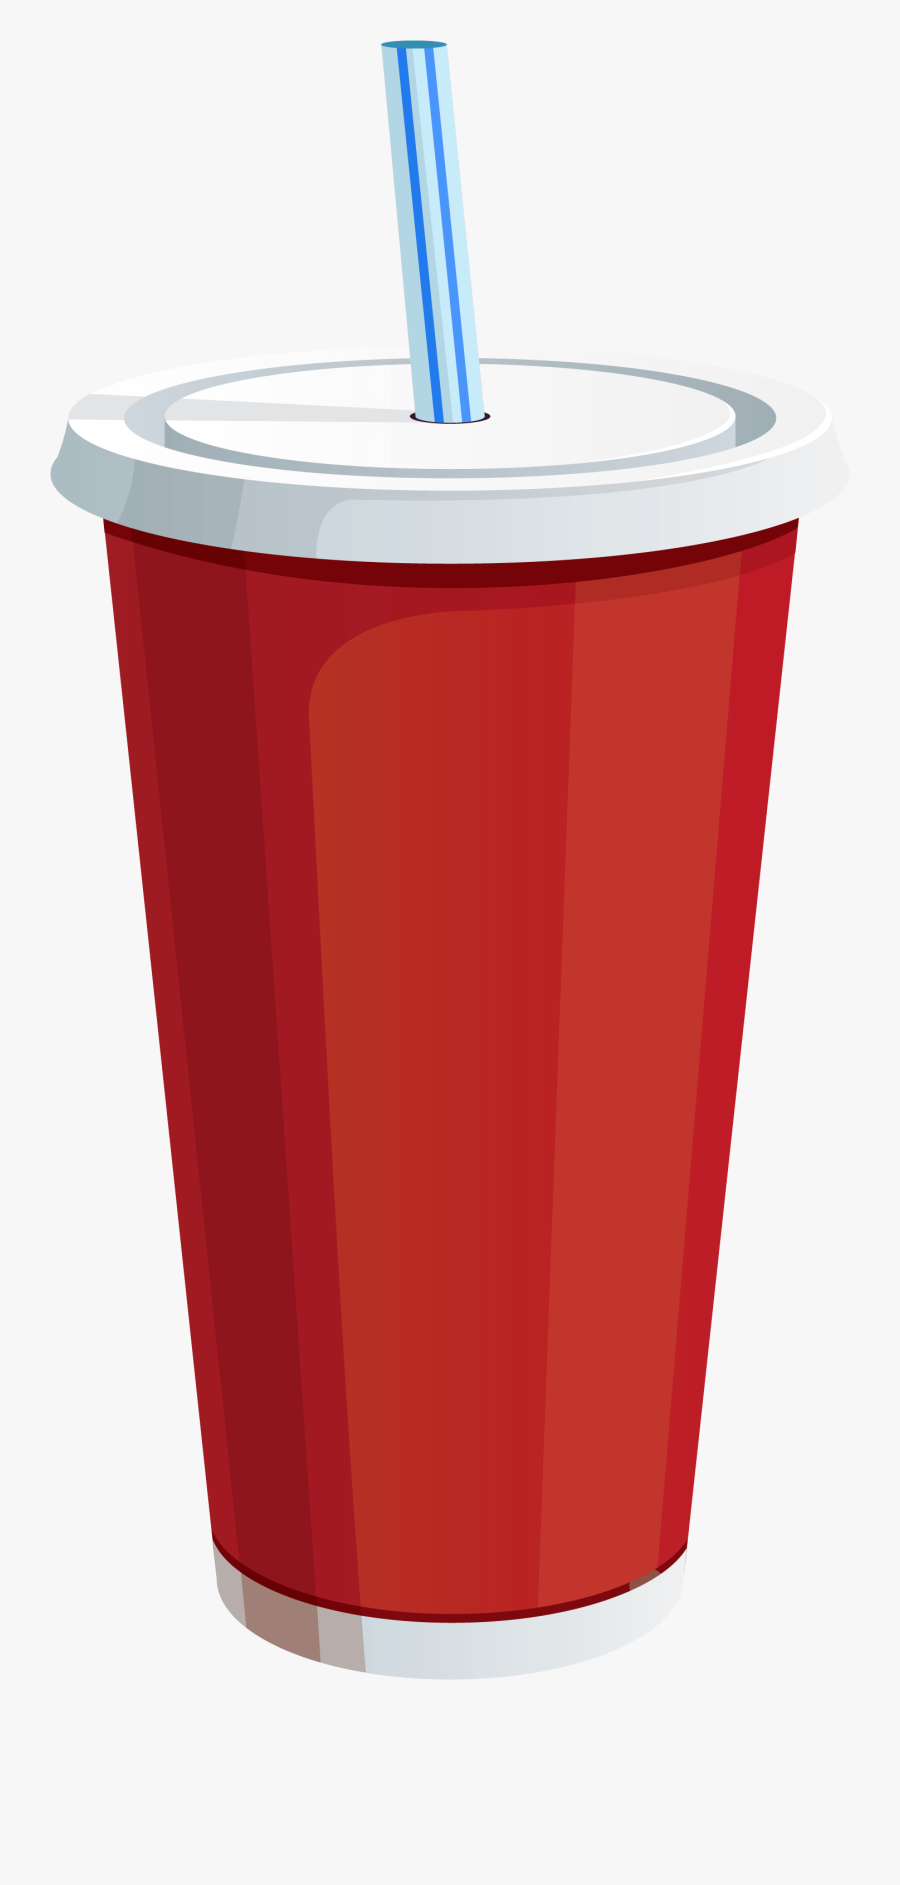 Drinking Cup Clipart - Transparent Background Drinks Clipart, Transparent Clipart